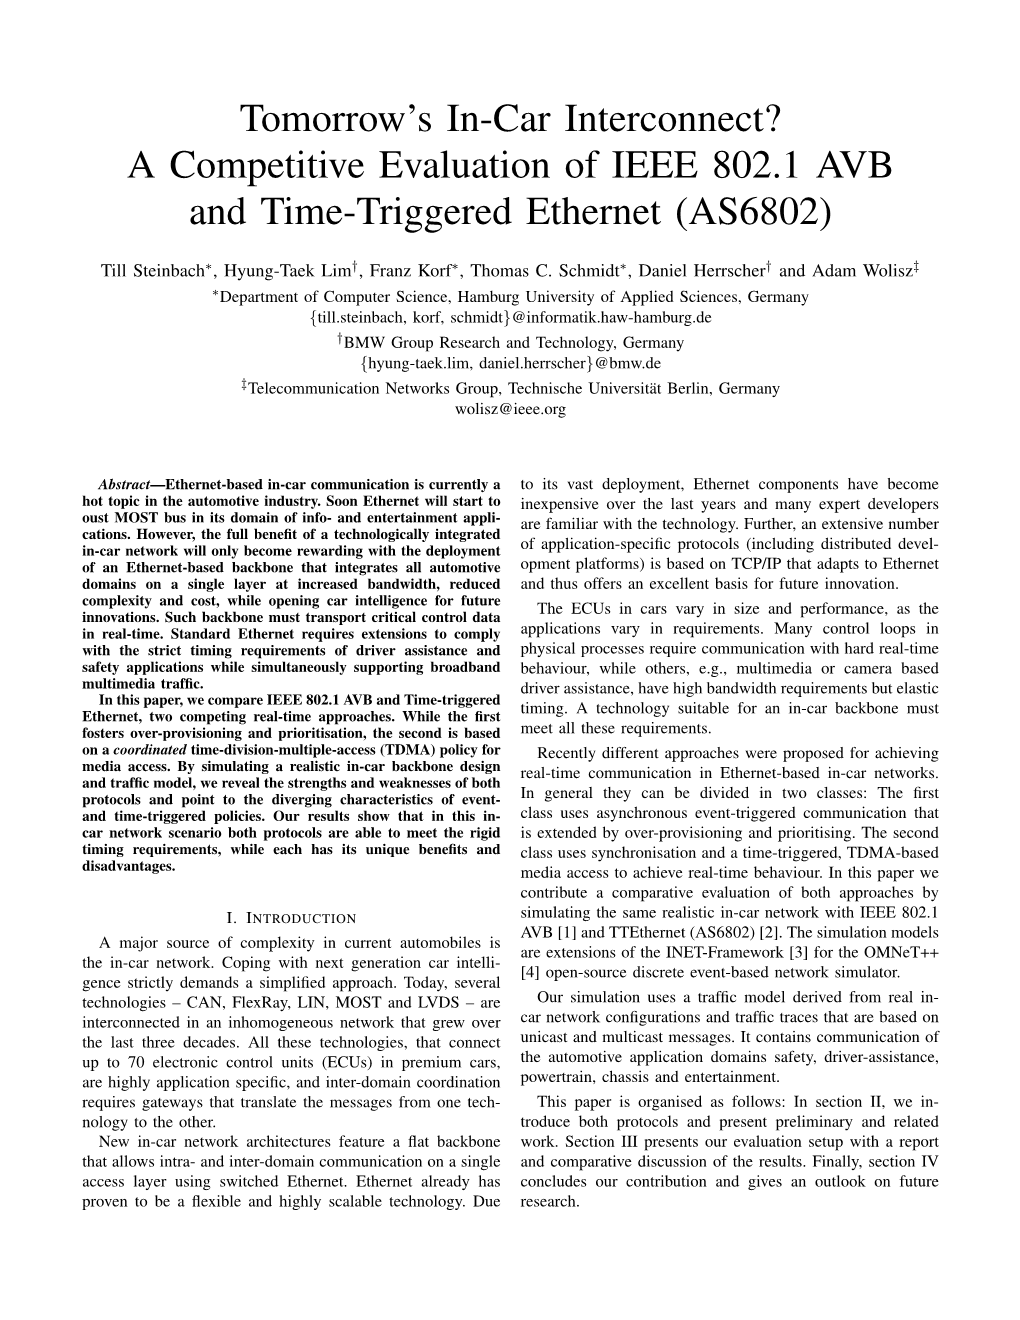 A Competitive Evaluation of IEEE 802.1 AVB and Time-Triggered Ethernet (AS6802)